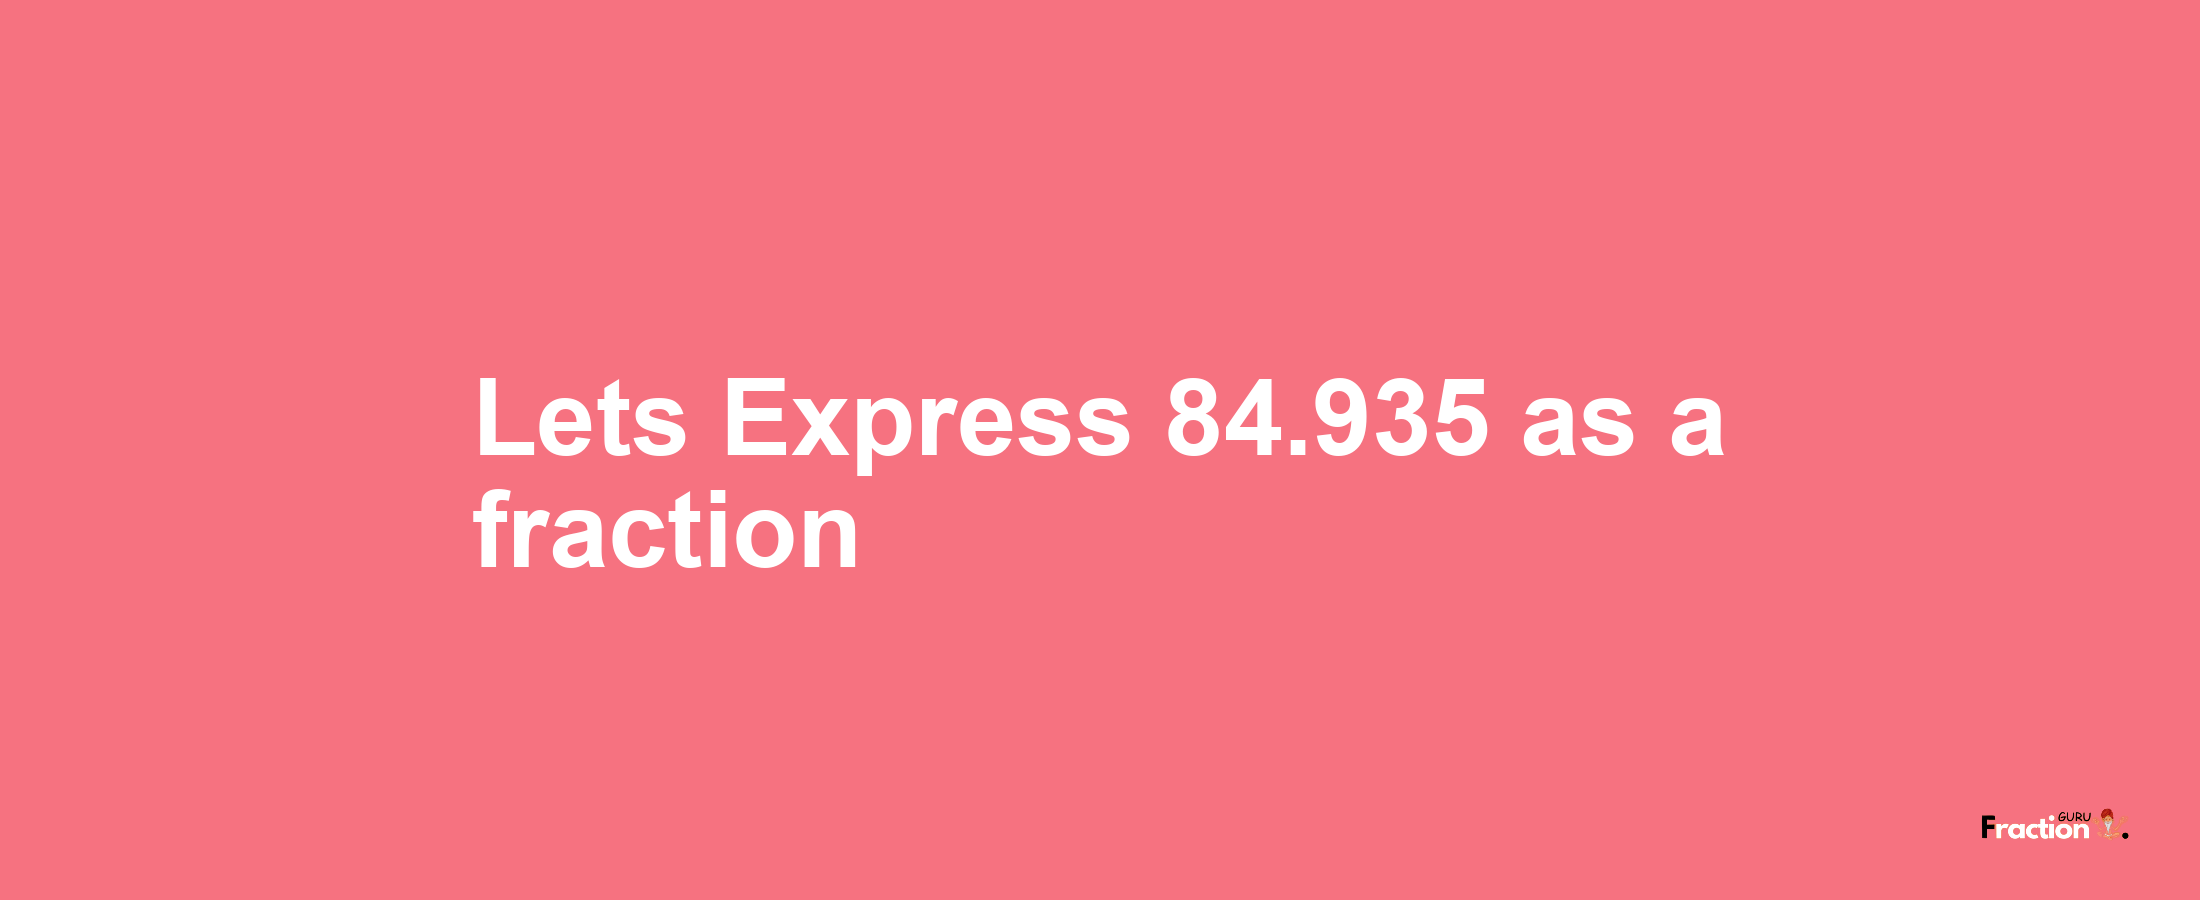 Lets Express 84.935 as afraction